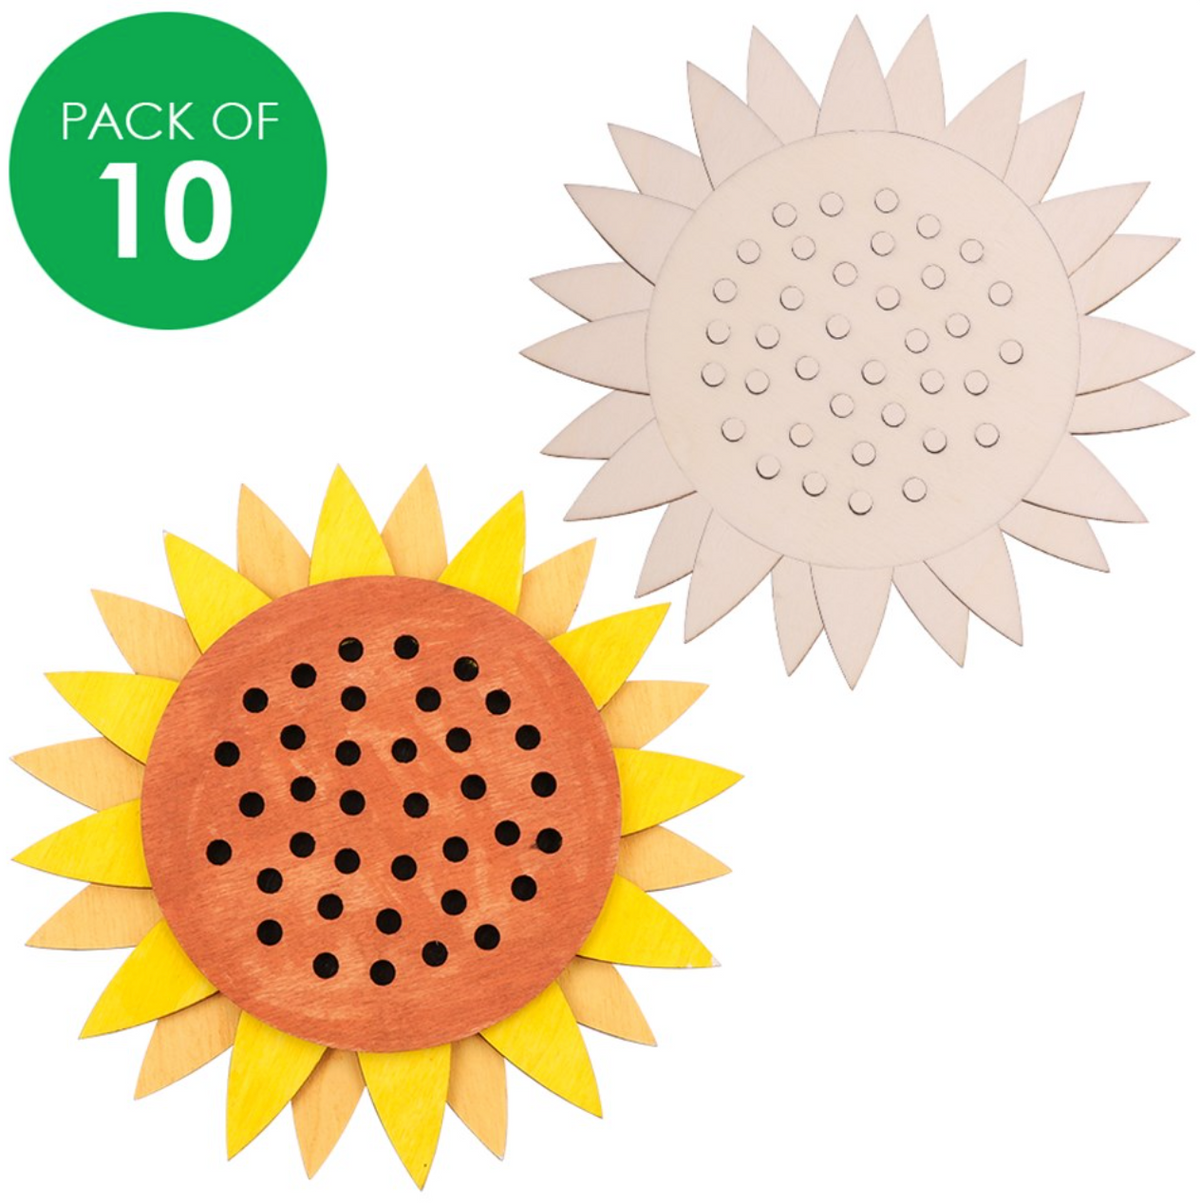 Wooden Sunflower Coasters - Pack of 10